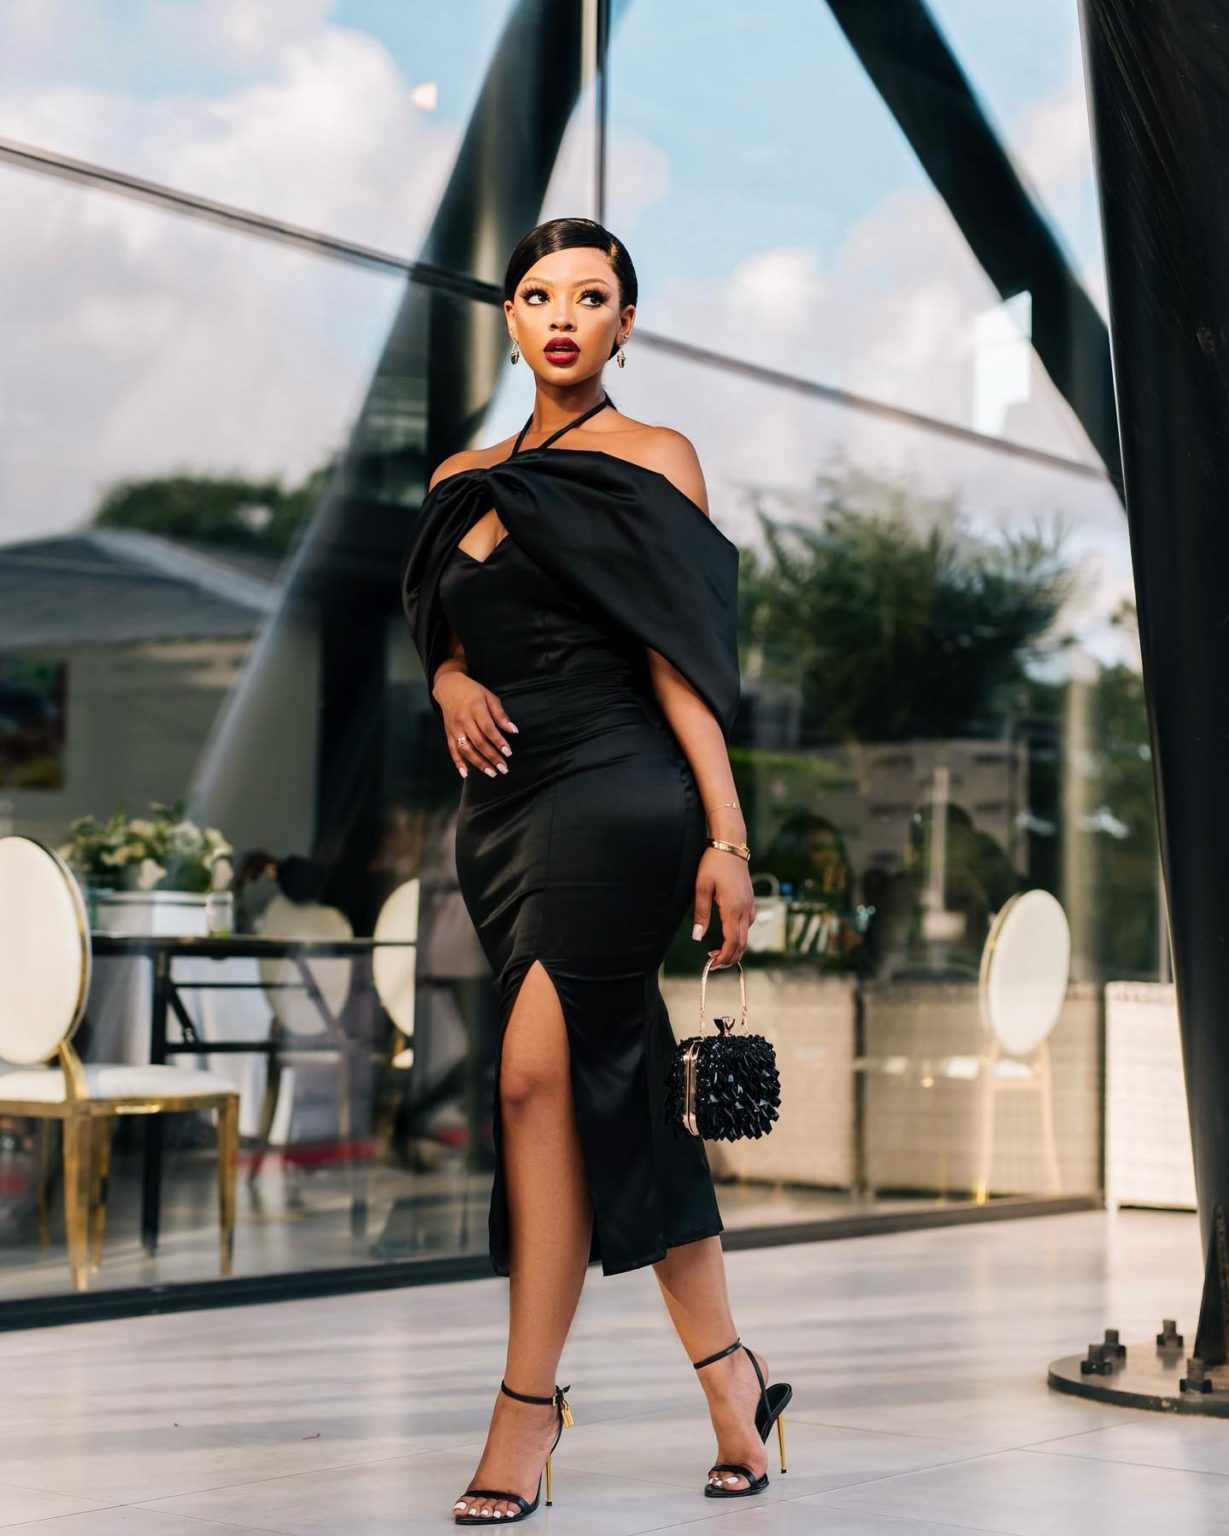 CelebsThatRock E102: 15 Styles To Help Get Your Groove On | ThriveNaija